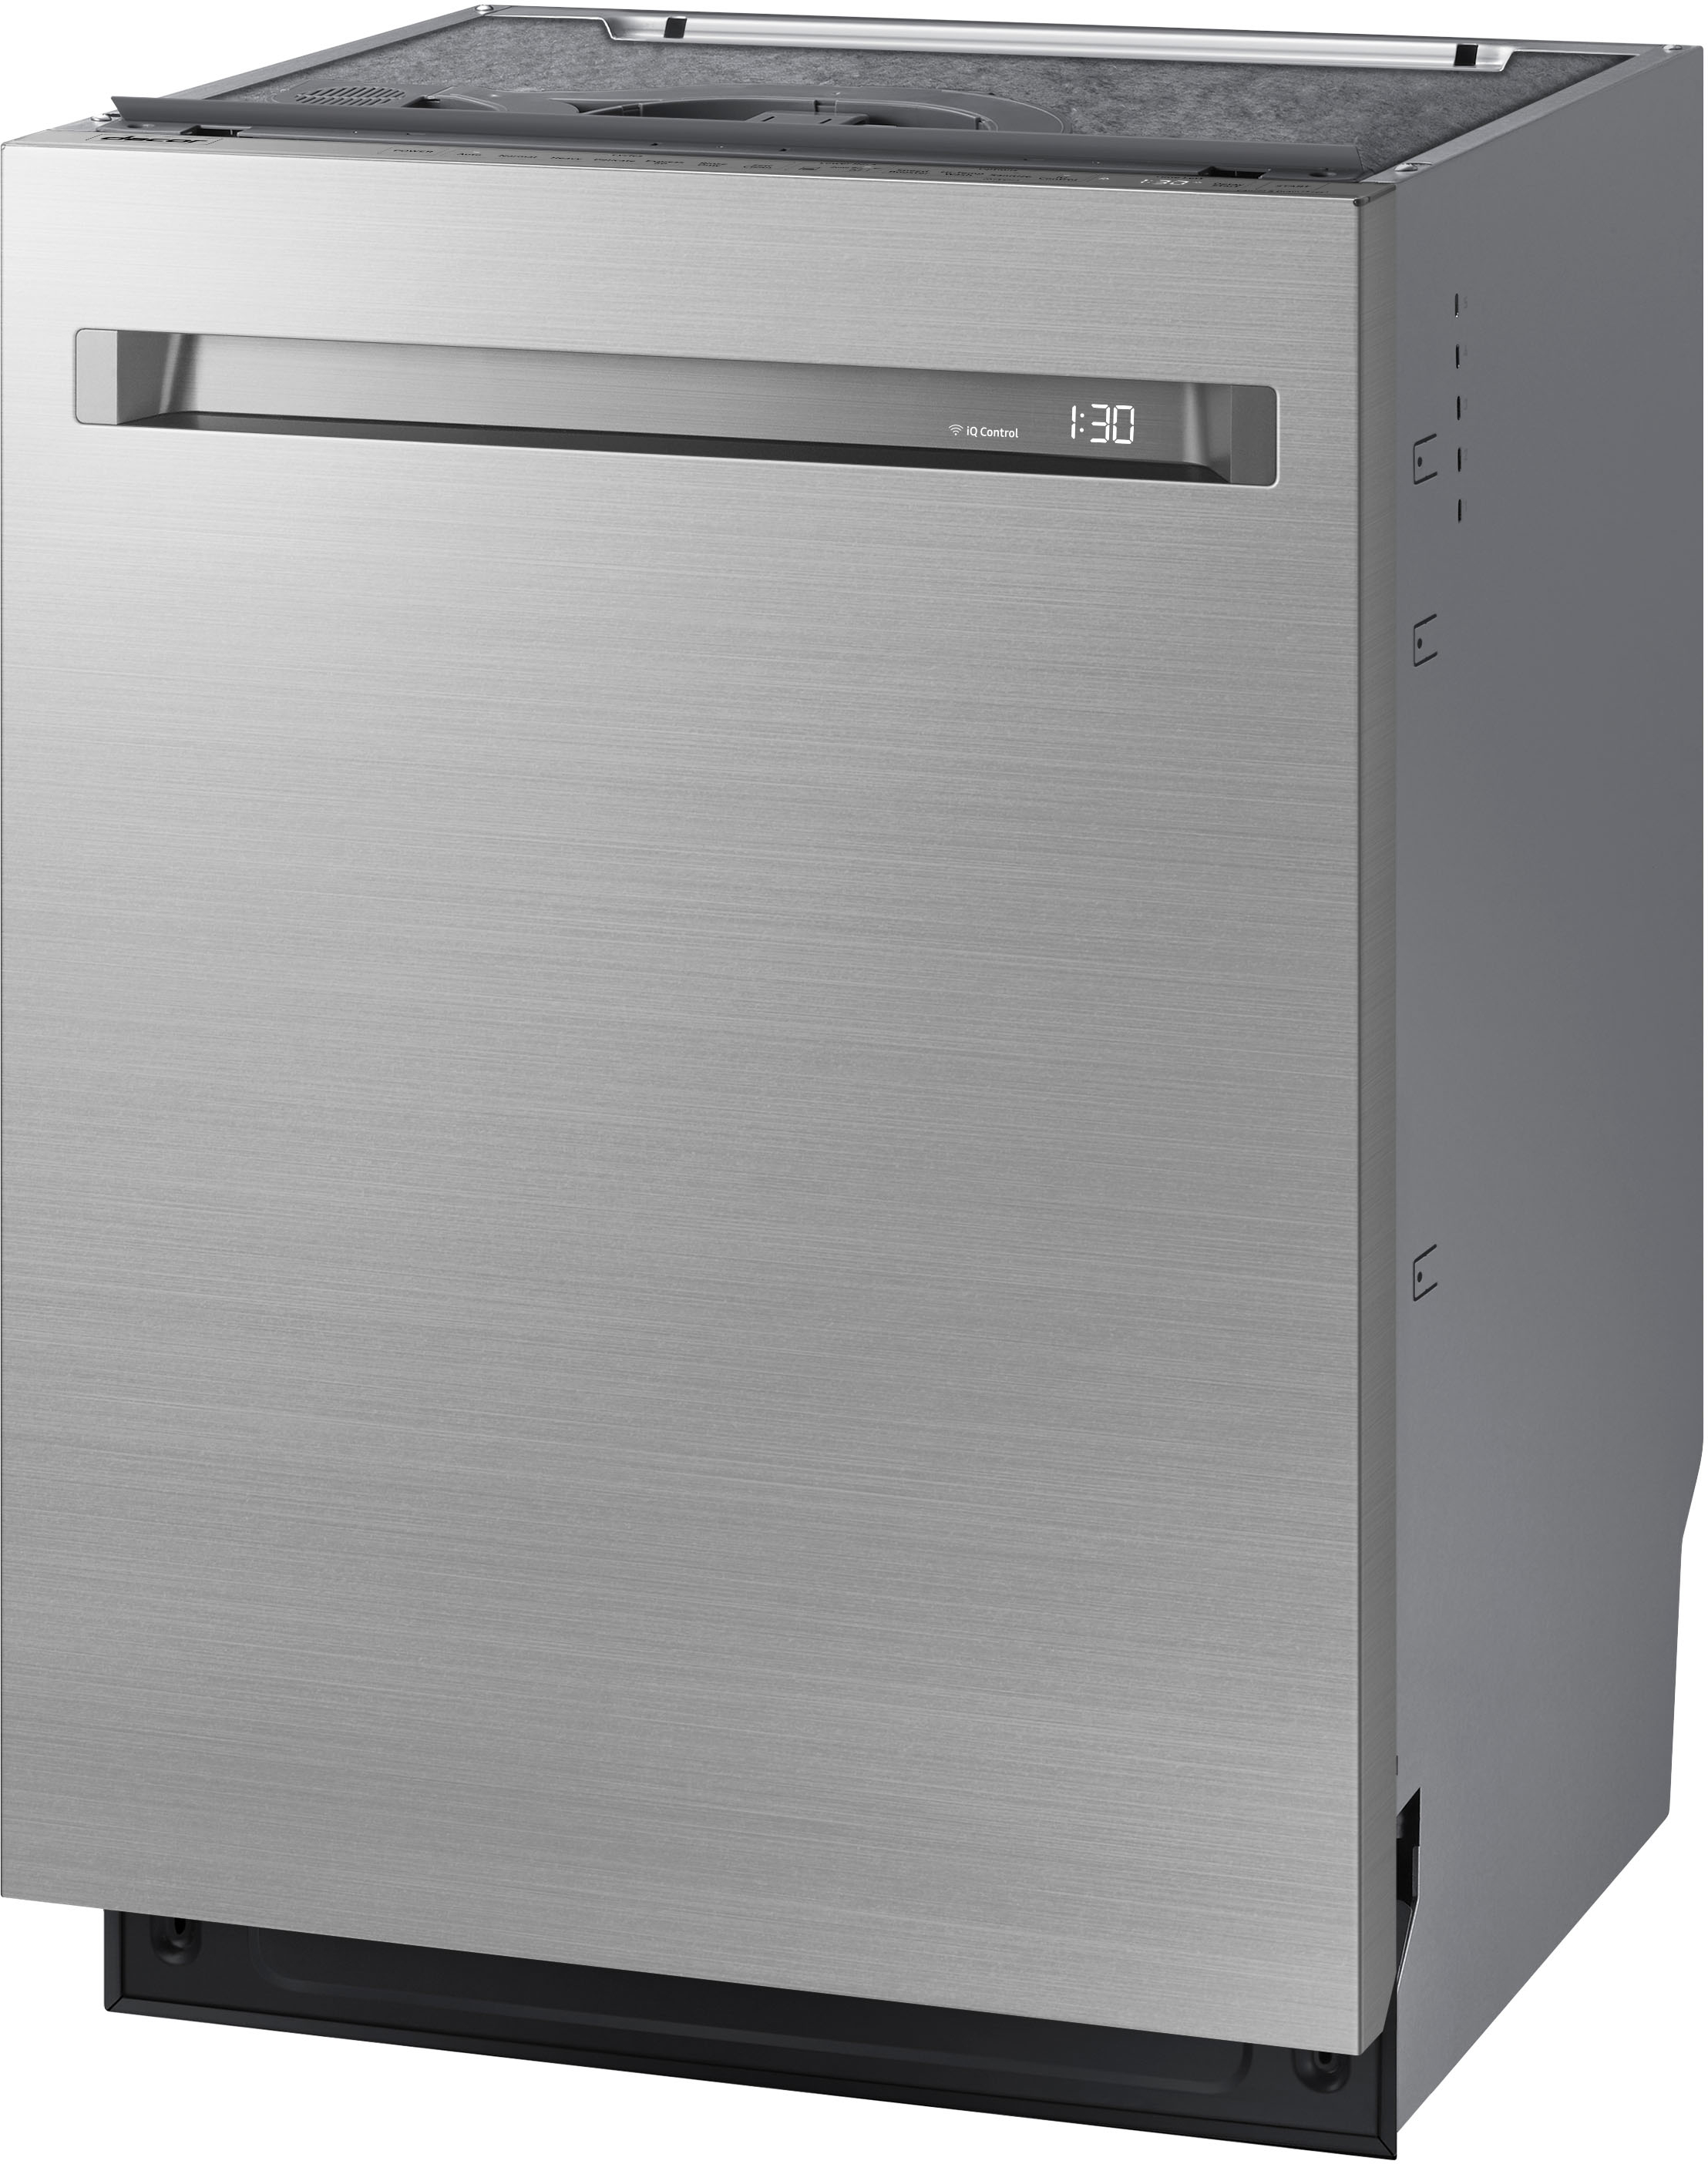 Angle View: Whirlpool - 24" Tall Tub Built-In Dishwasher - Black